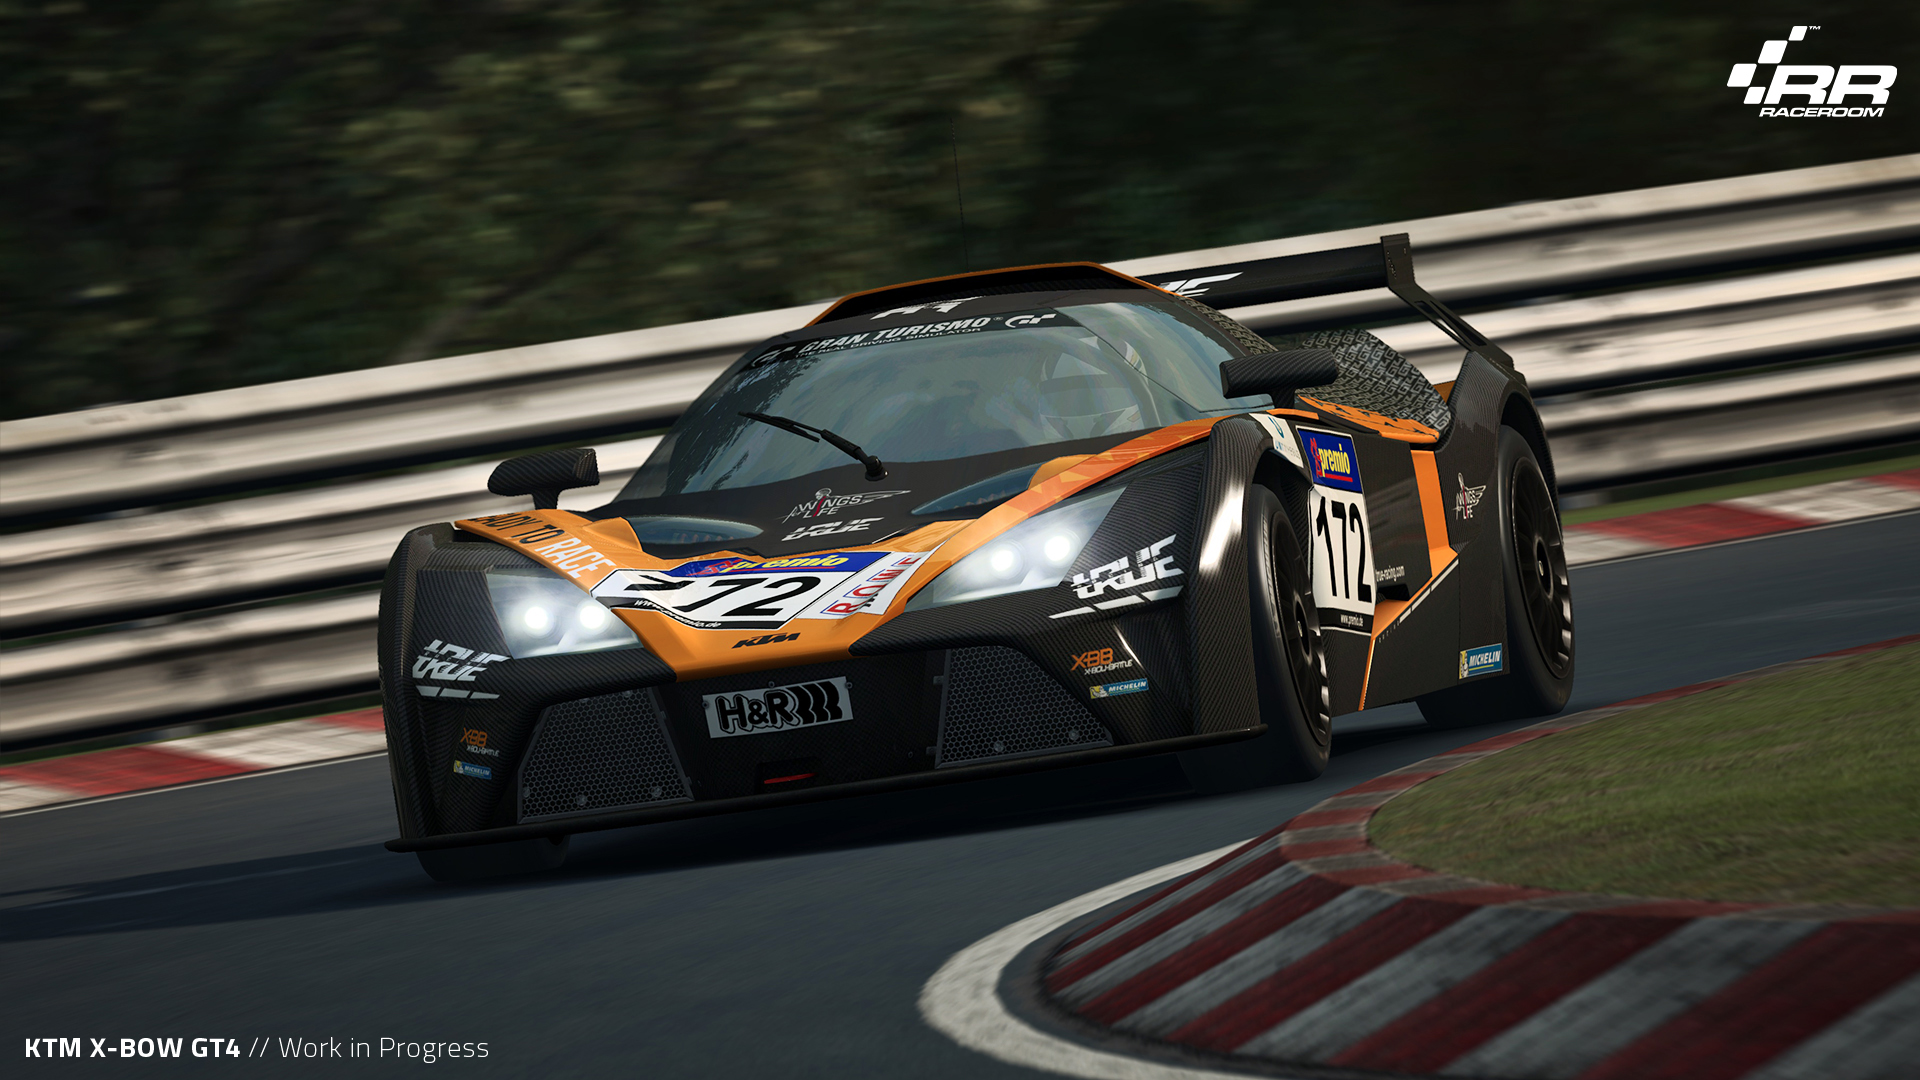 KTM X-BOW GT4 Coming To RaceRoom - Bsimracing